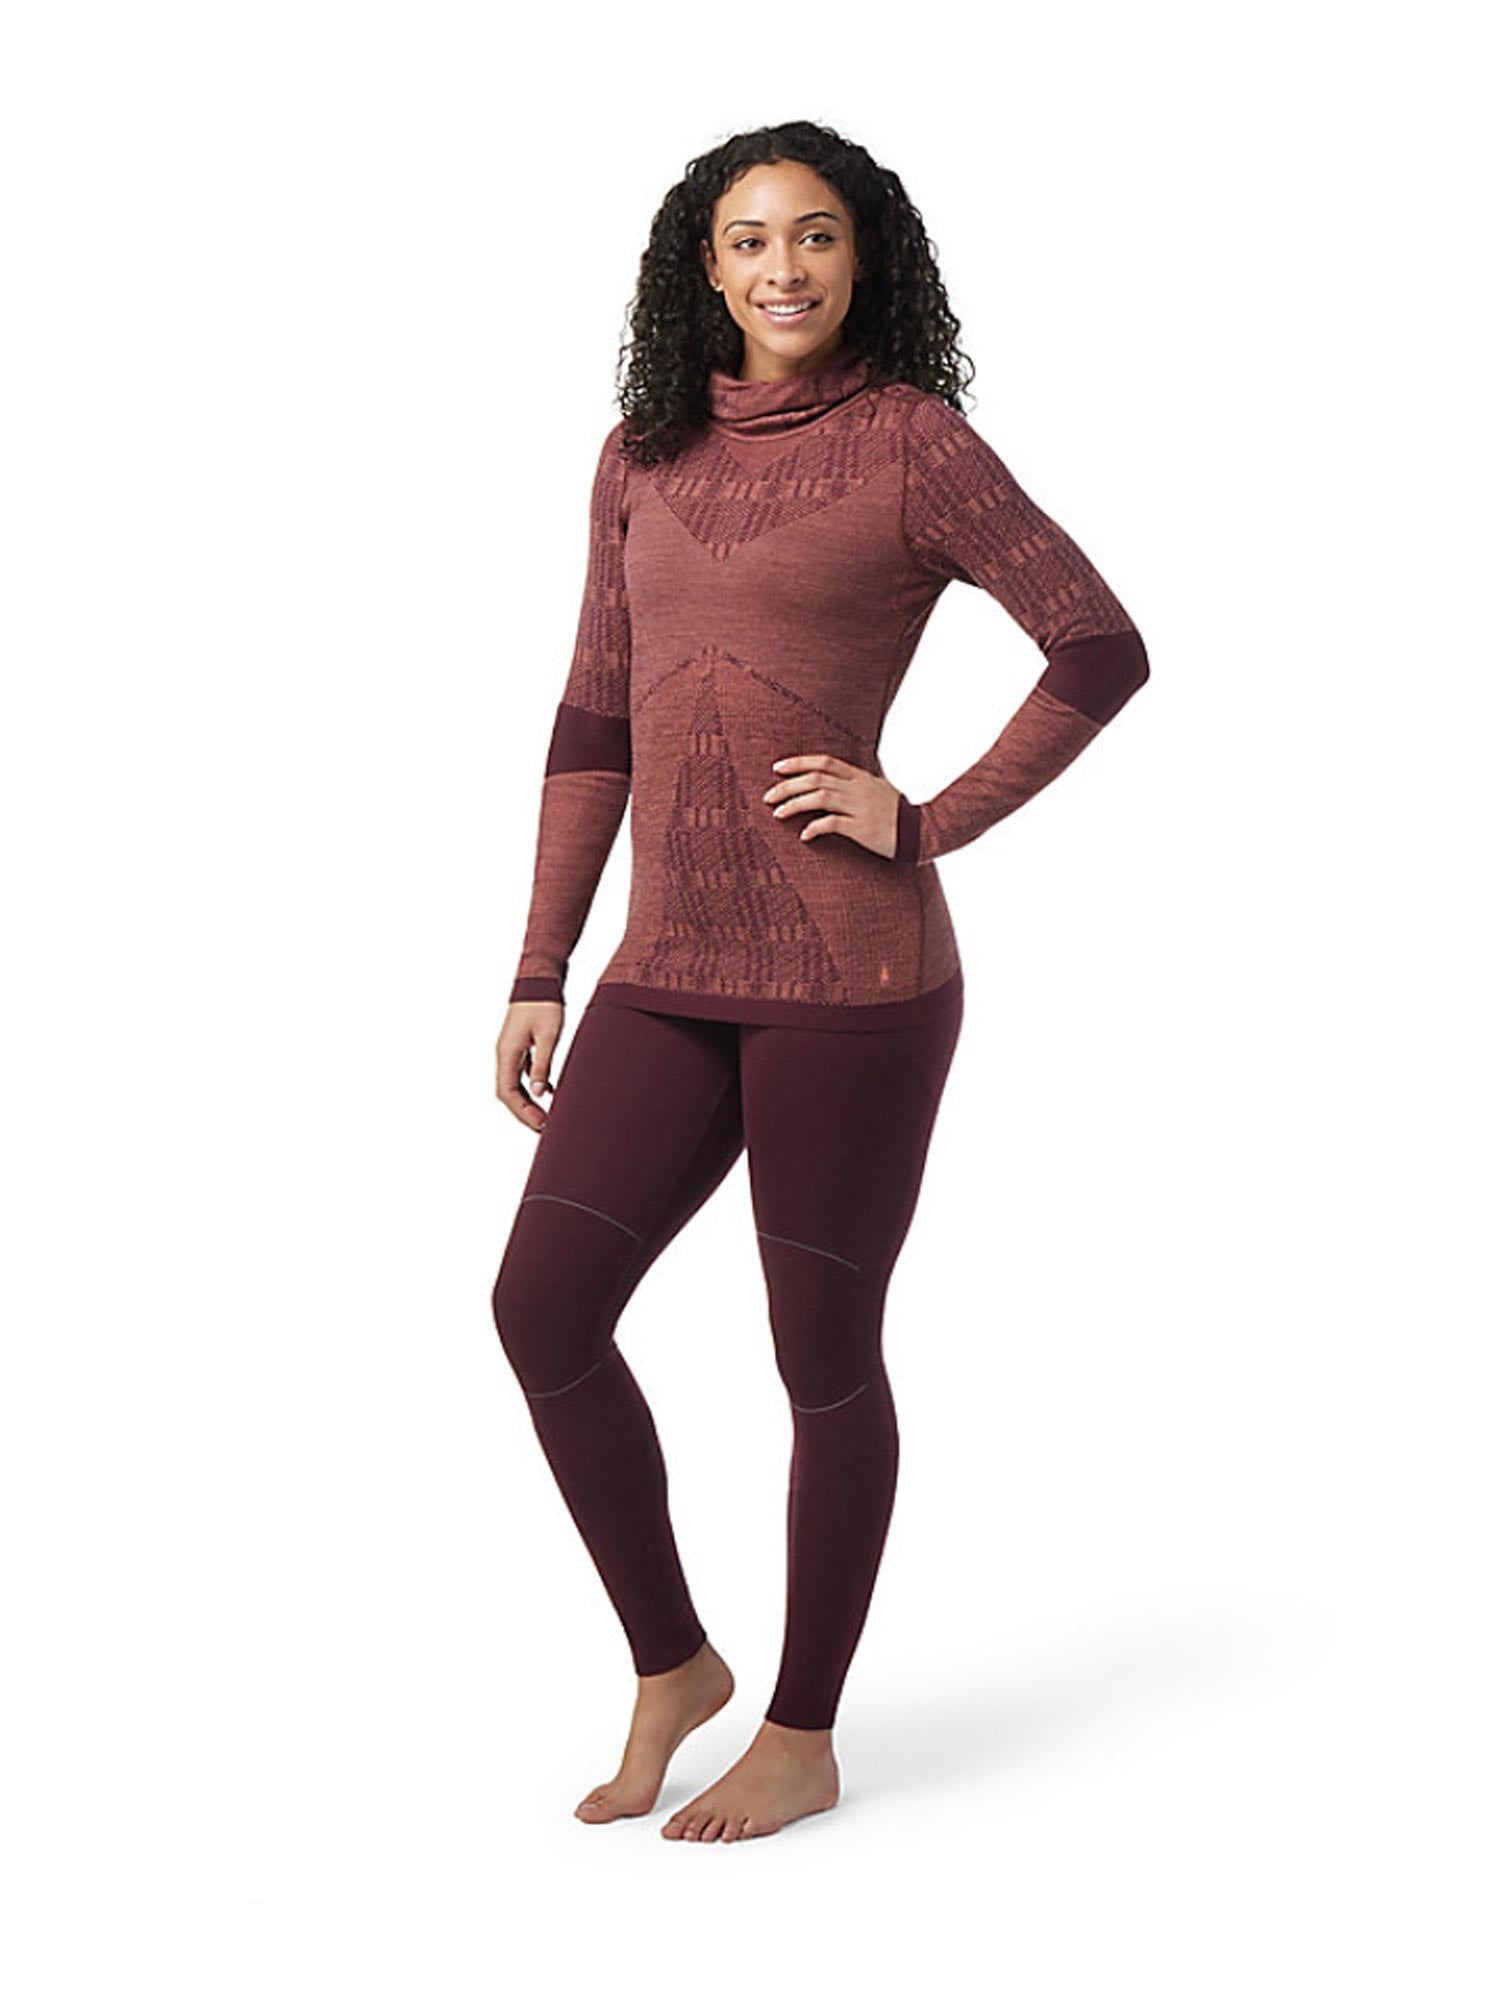 women's Smartwool hooded base layer top, cherry